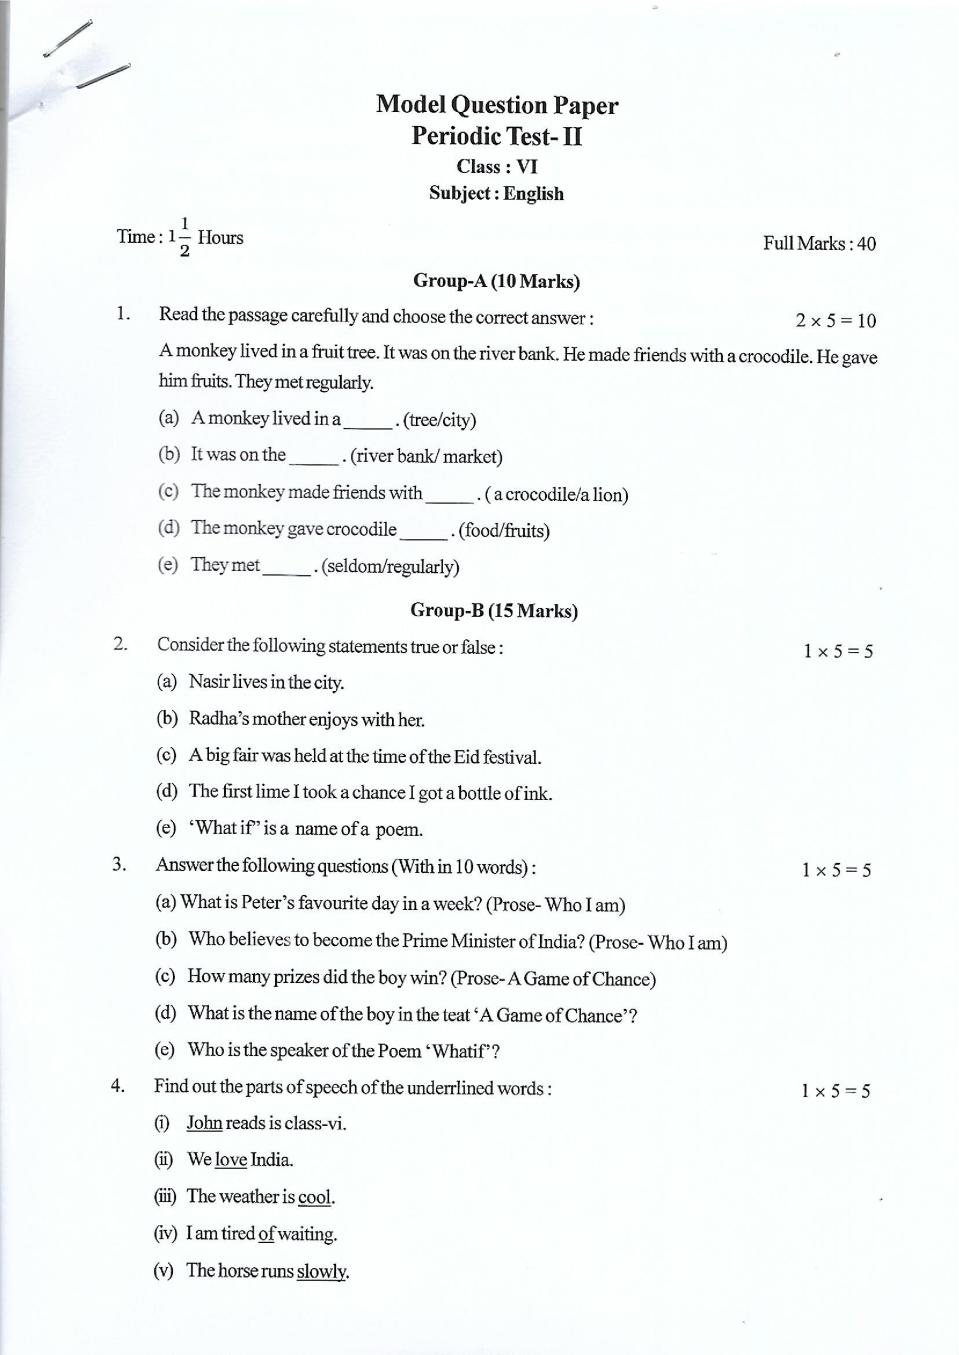 Tripura Board Model Question Paper for Class 6 Annual Exam - Page 1